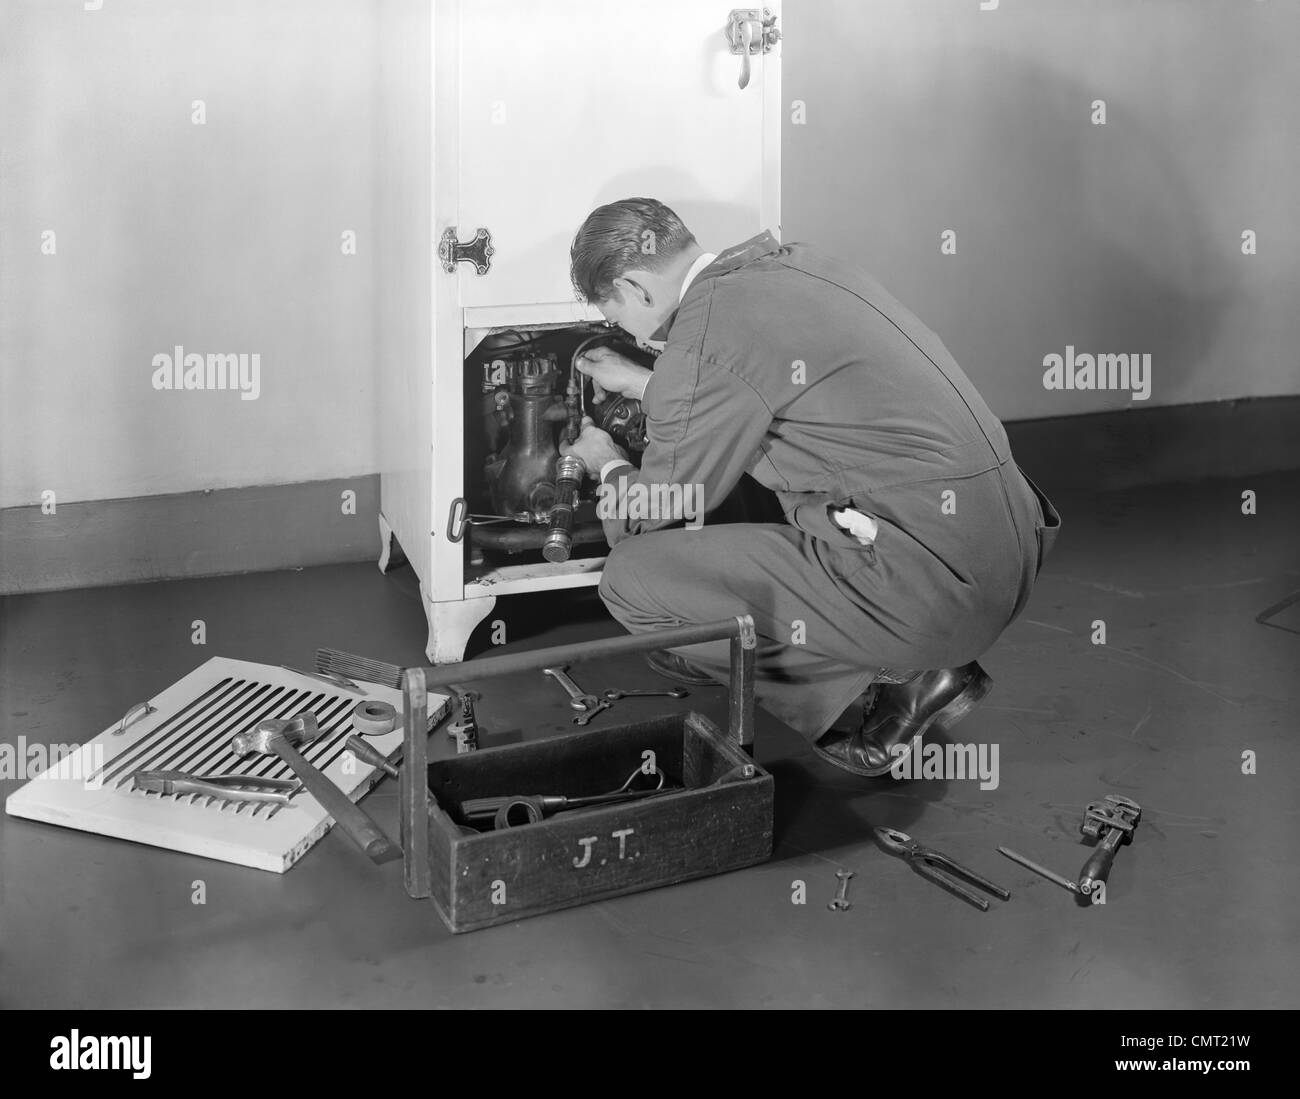 1930s 1940s MAN WORKMAN FIXING REFRIGERATION MACHINERY OF REFRIGERATOR IN KITCHEN REPAIR SERVICE Stock Photo